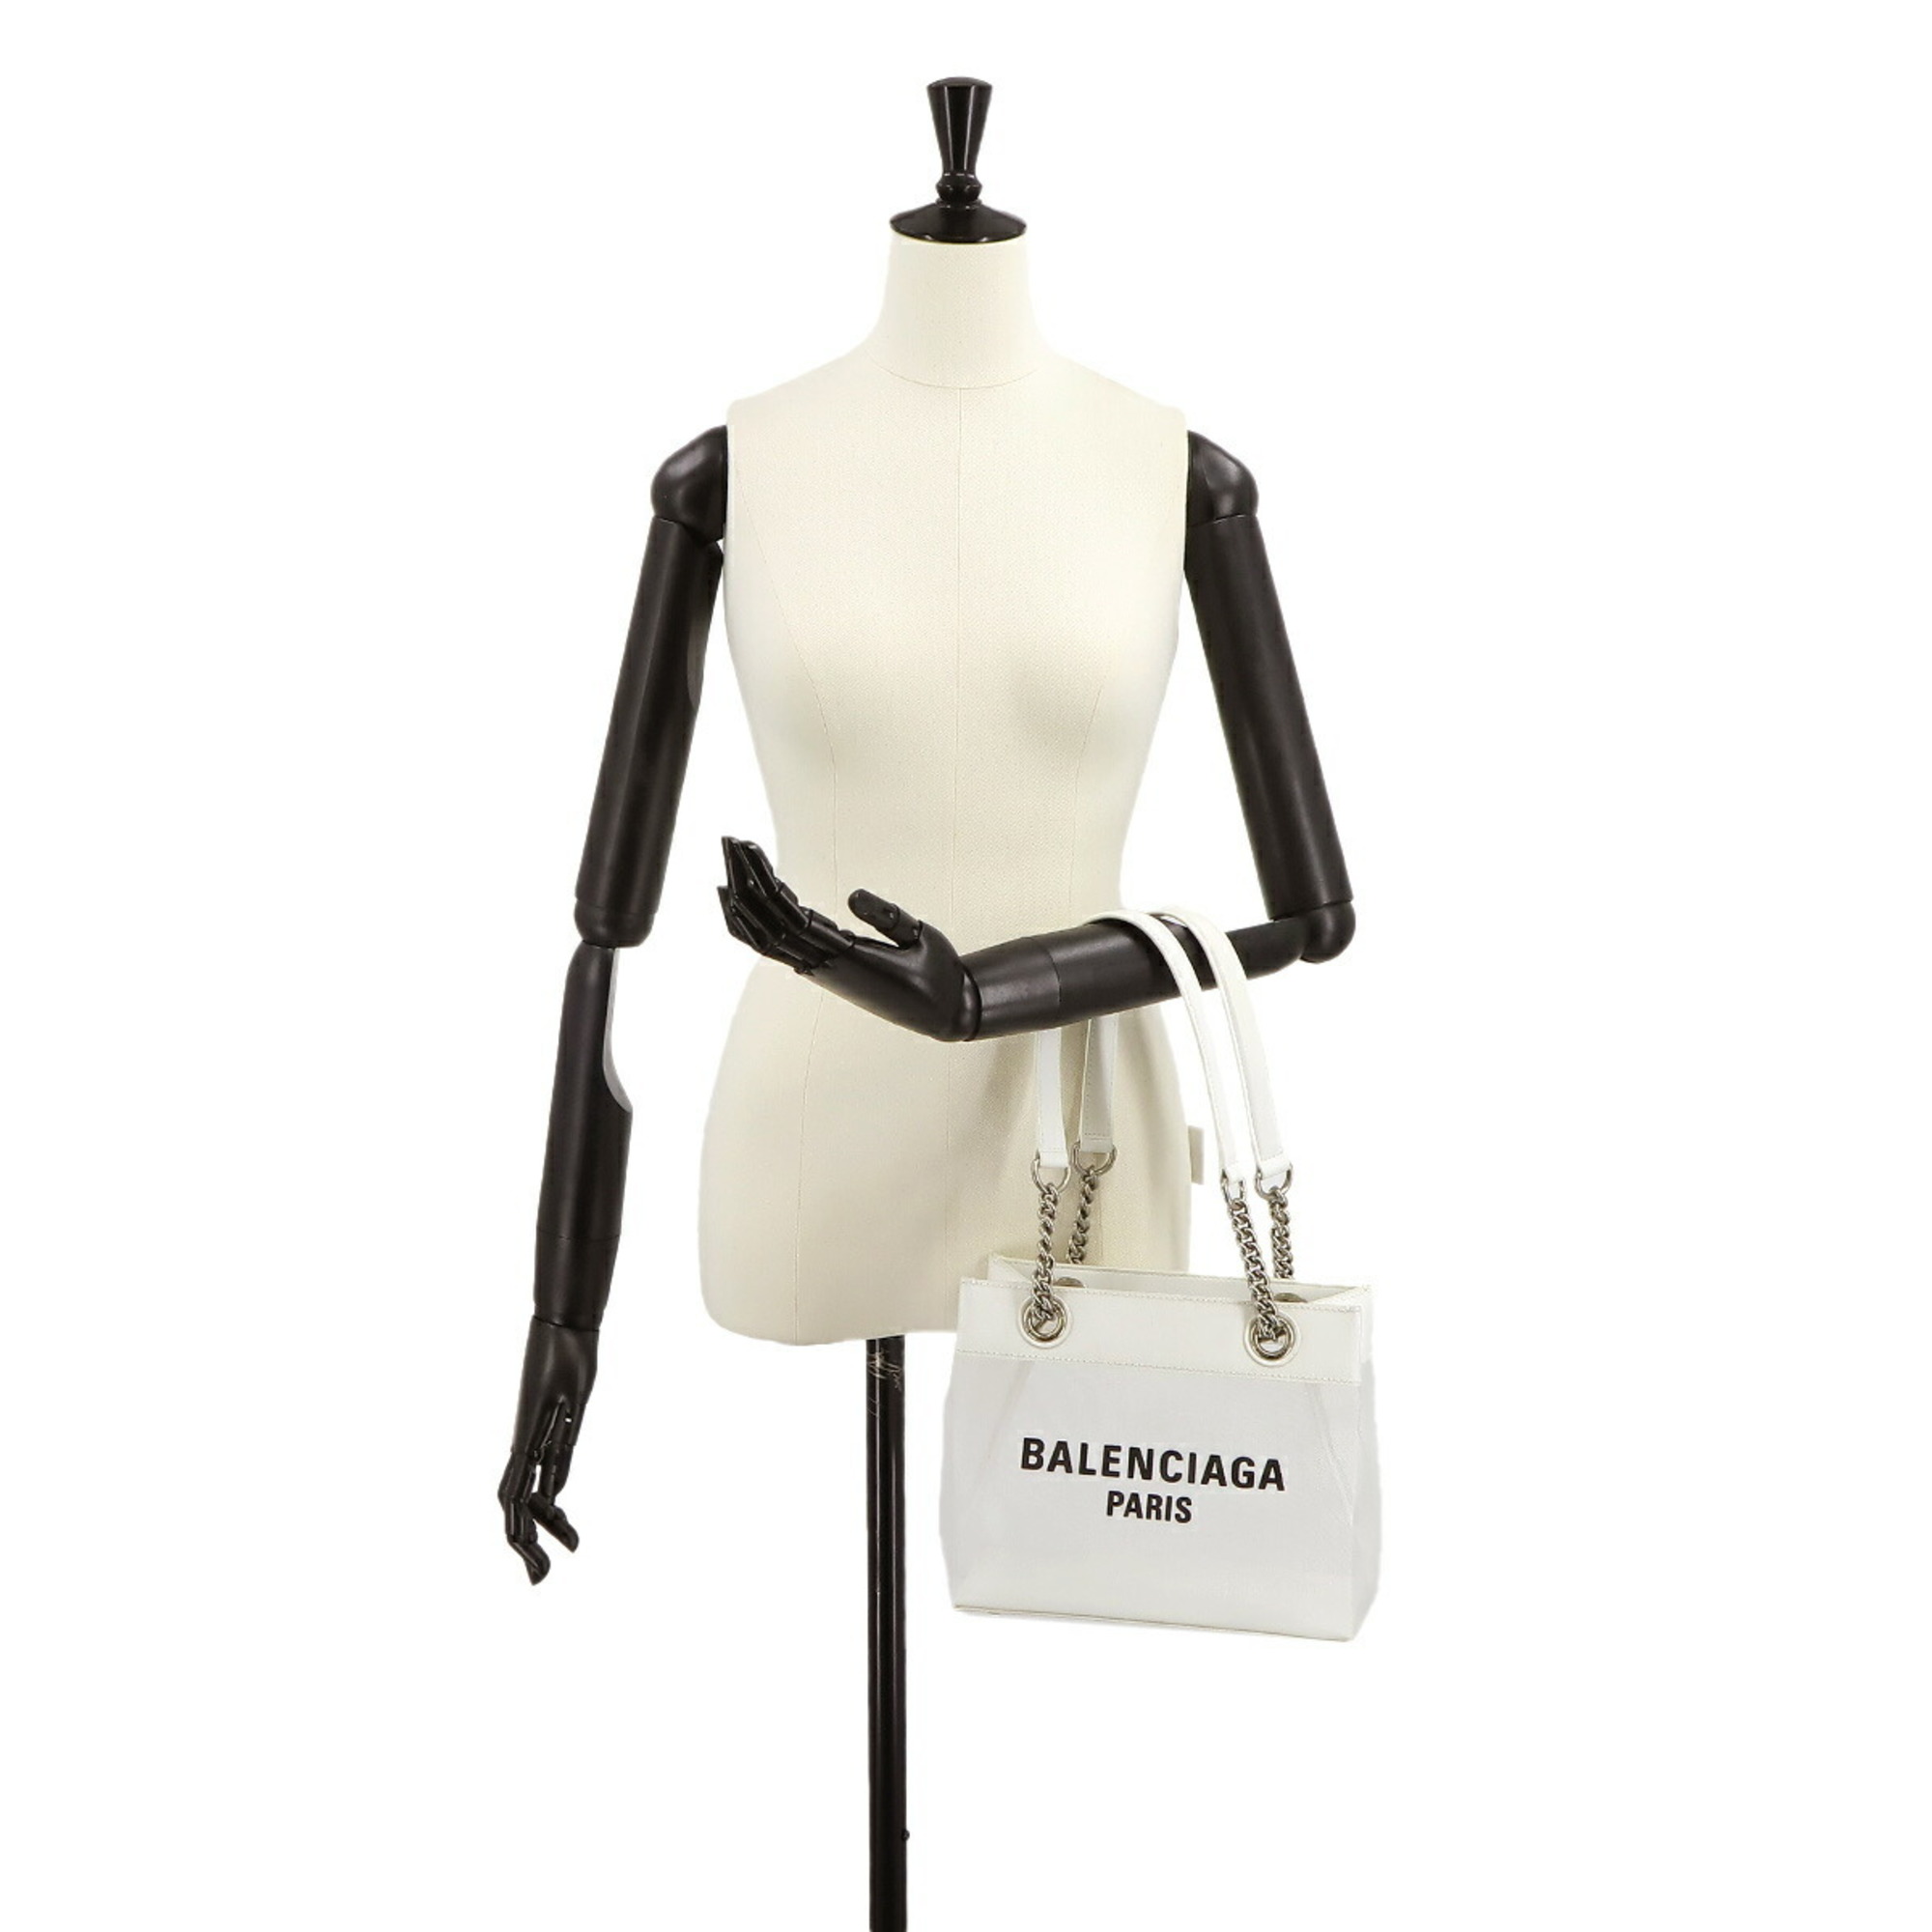 BALENCIAGA Duty Free Small Tote in Polyester, Leather, Mesh, White 741603